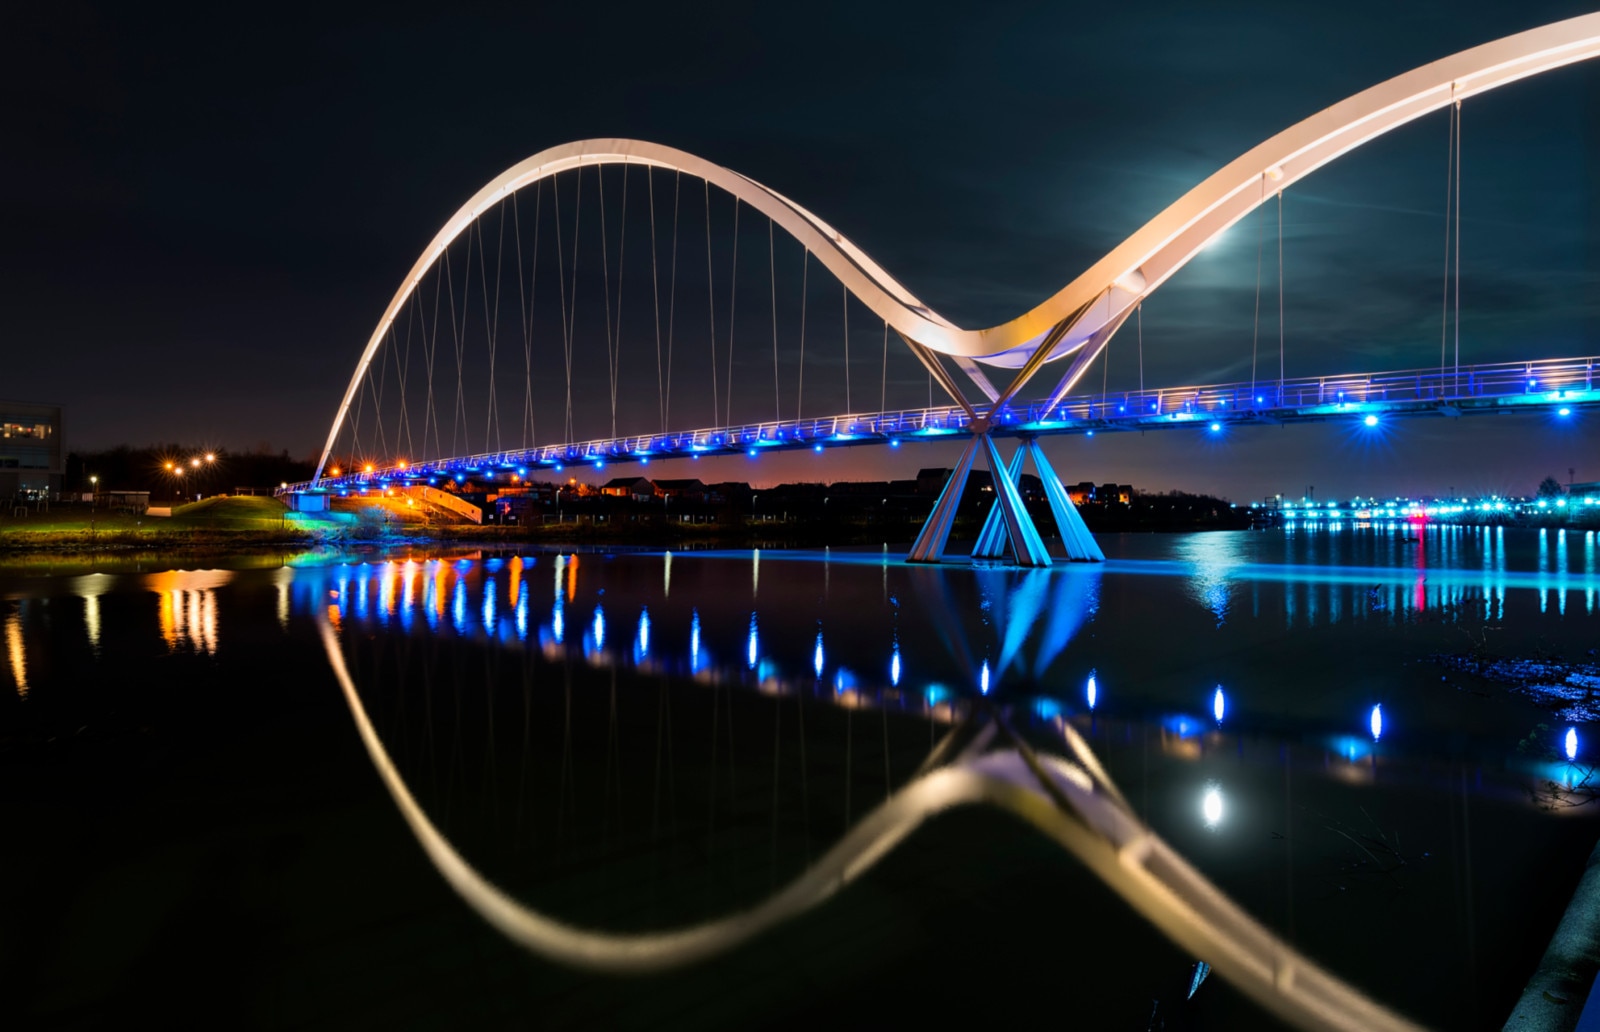 The Infinity Bridge is a public pedestrian and cycle footbridge across the River Tees in the borough of Stockton-on-Tees in northern England.